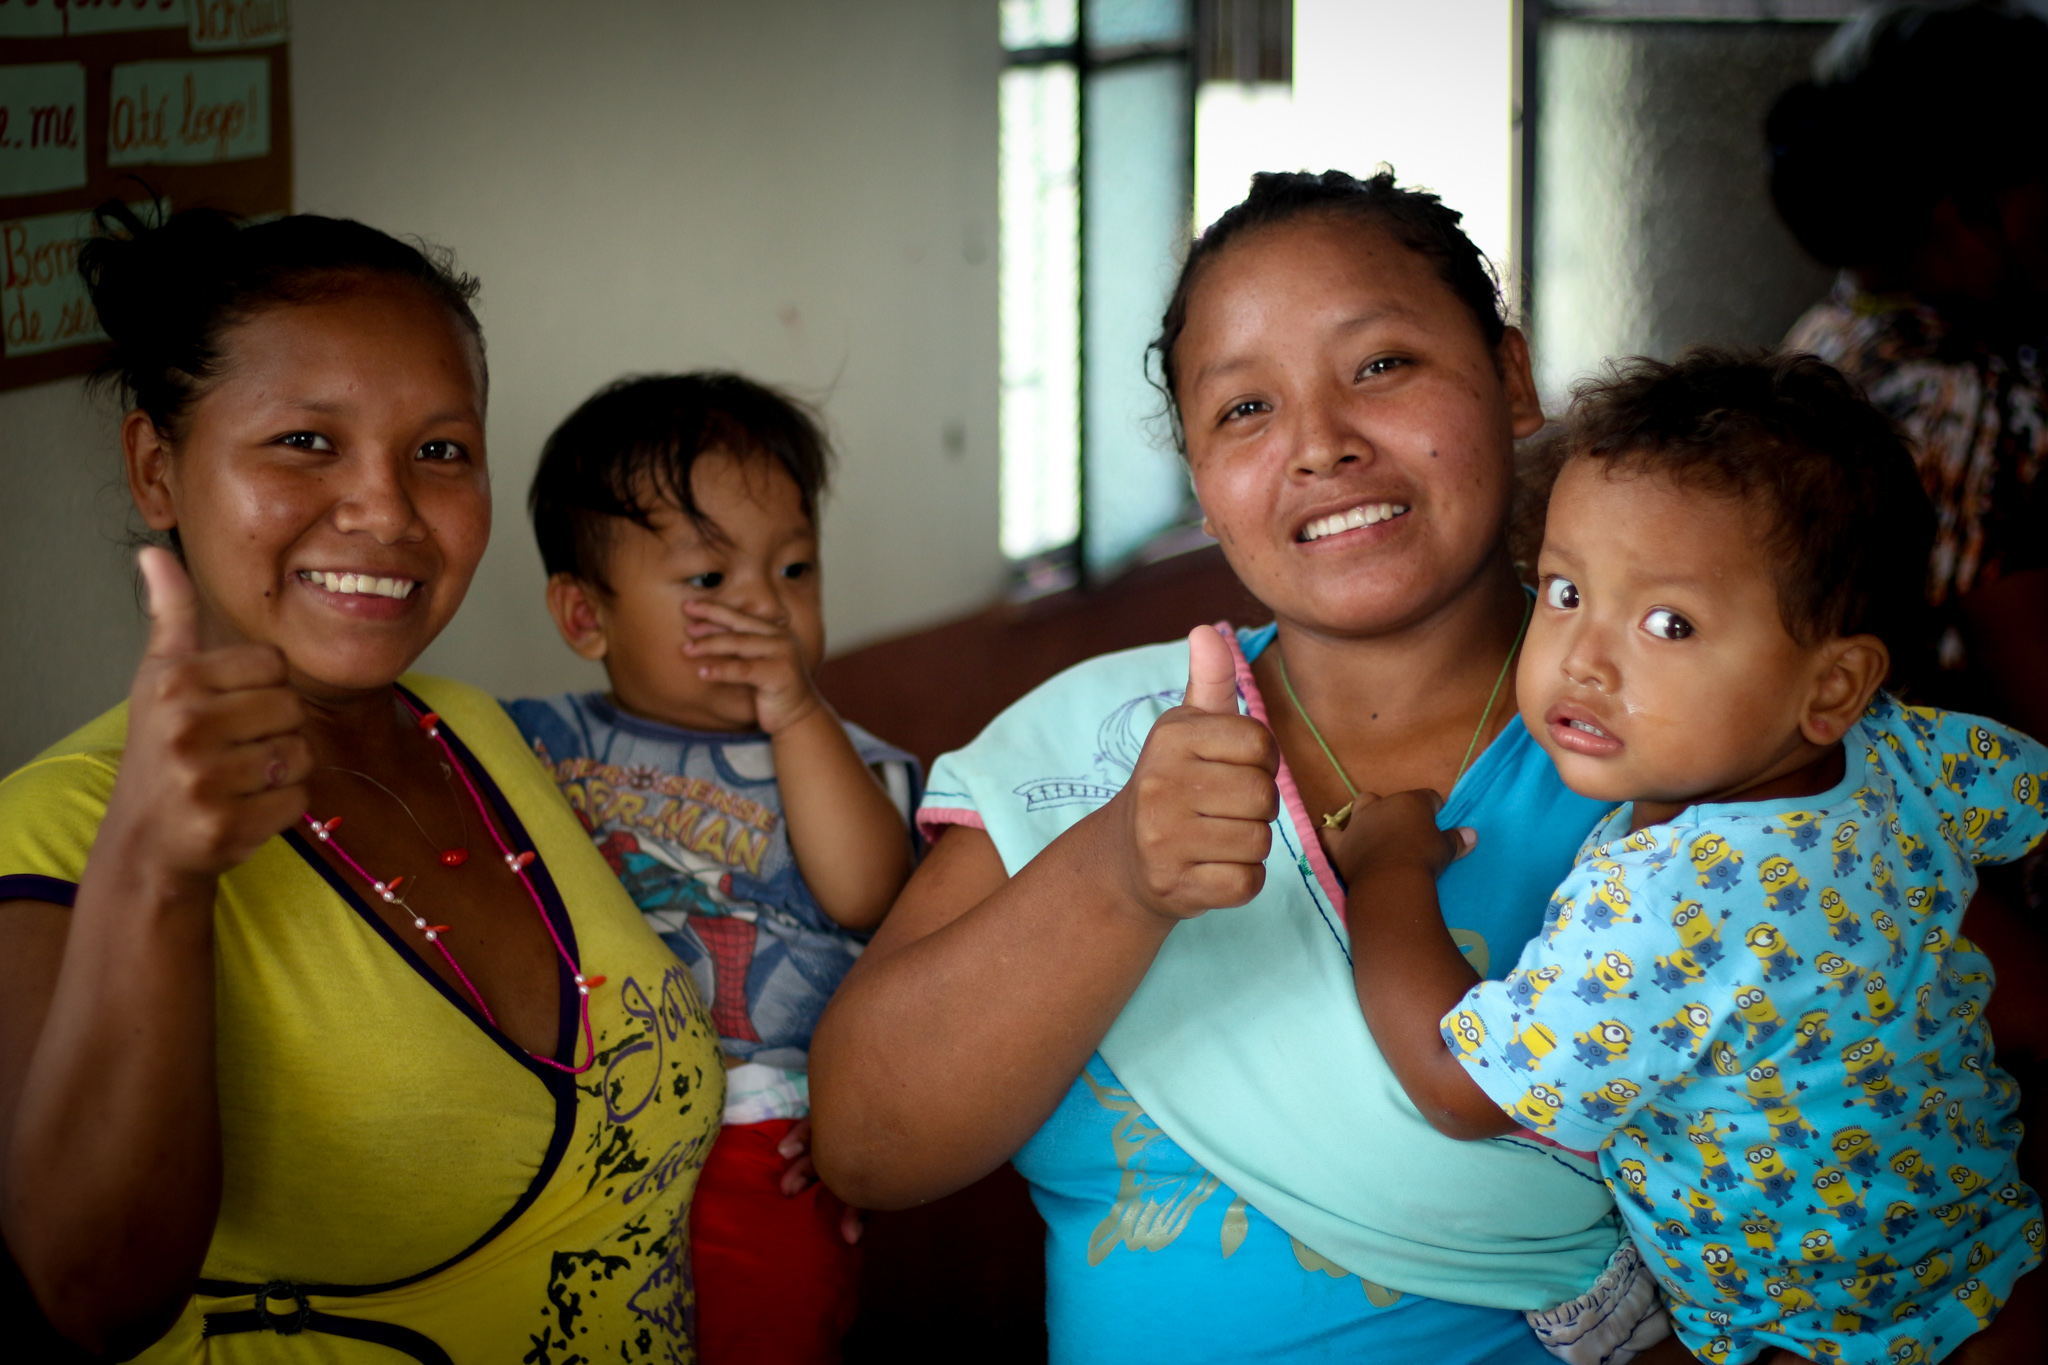 Two women smile facing the camera. They are both holding children.